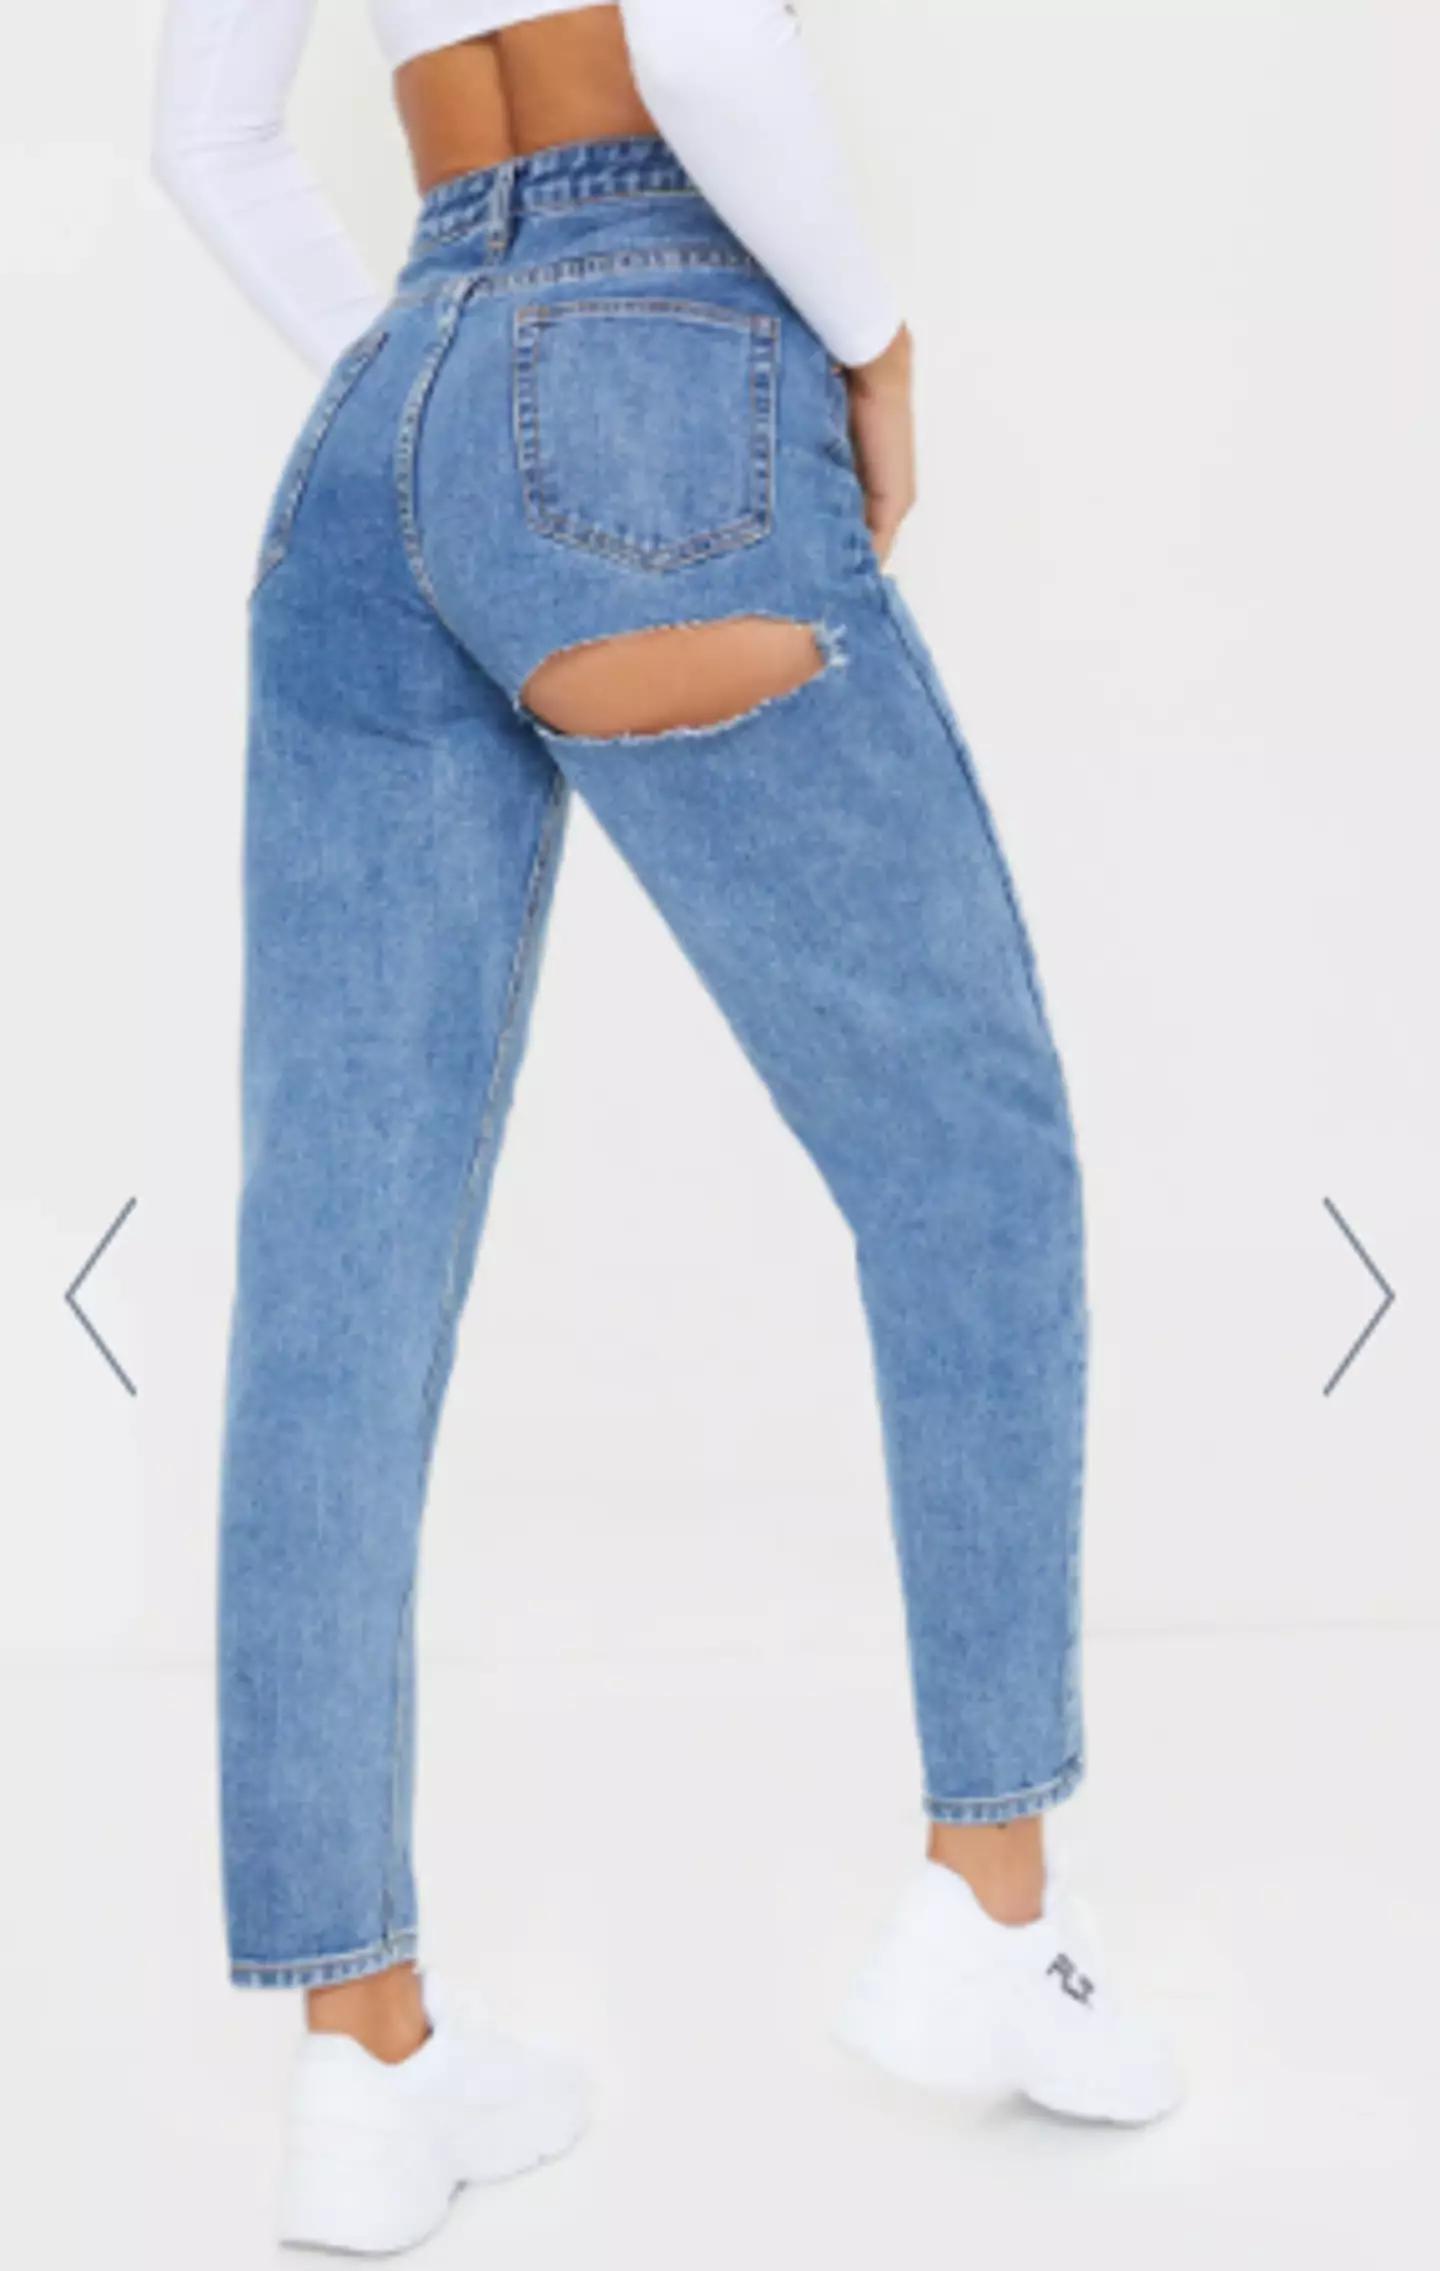 ASOS and Topshop are not the only retailer to put out bum rip jeans. (